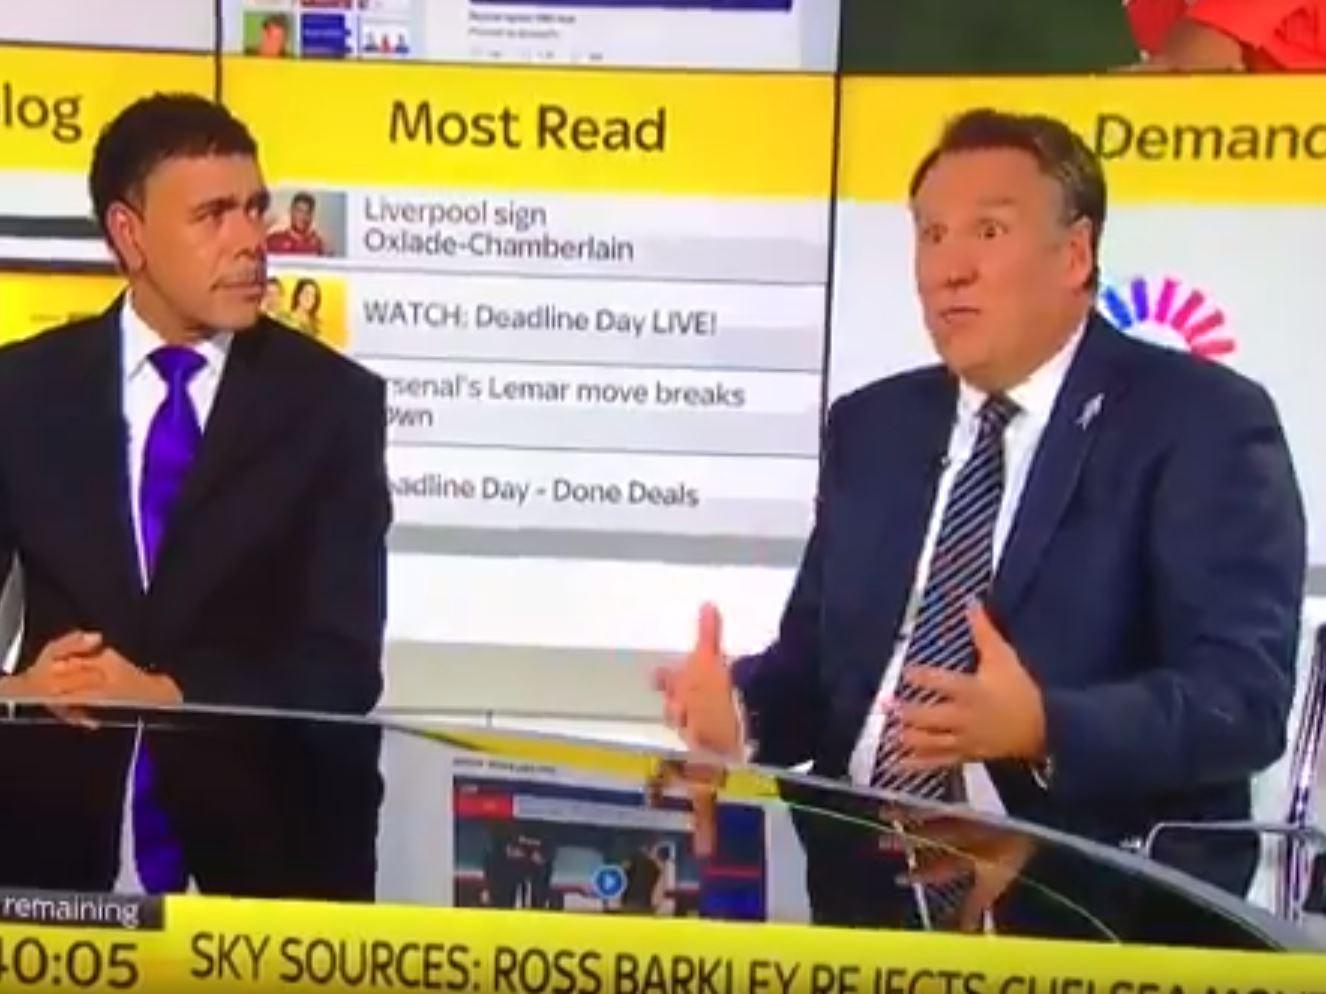 Paul Merson was bemused by Barkley's refusal to leave Merseyside